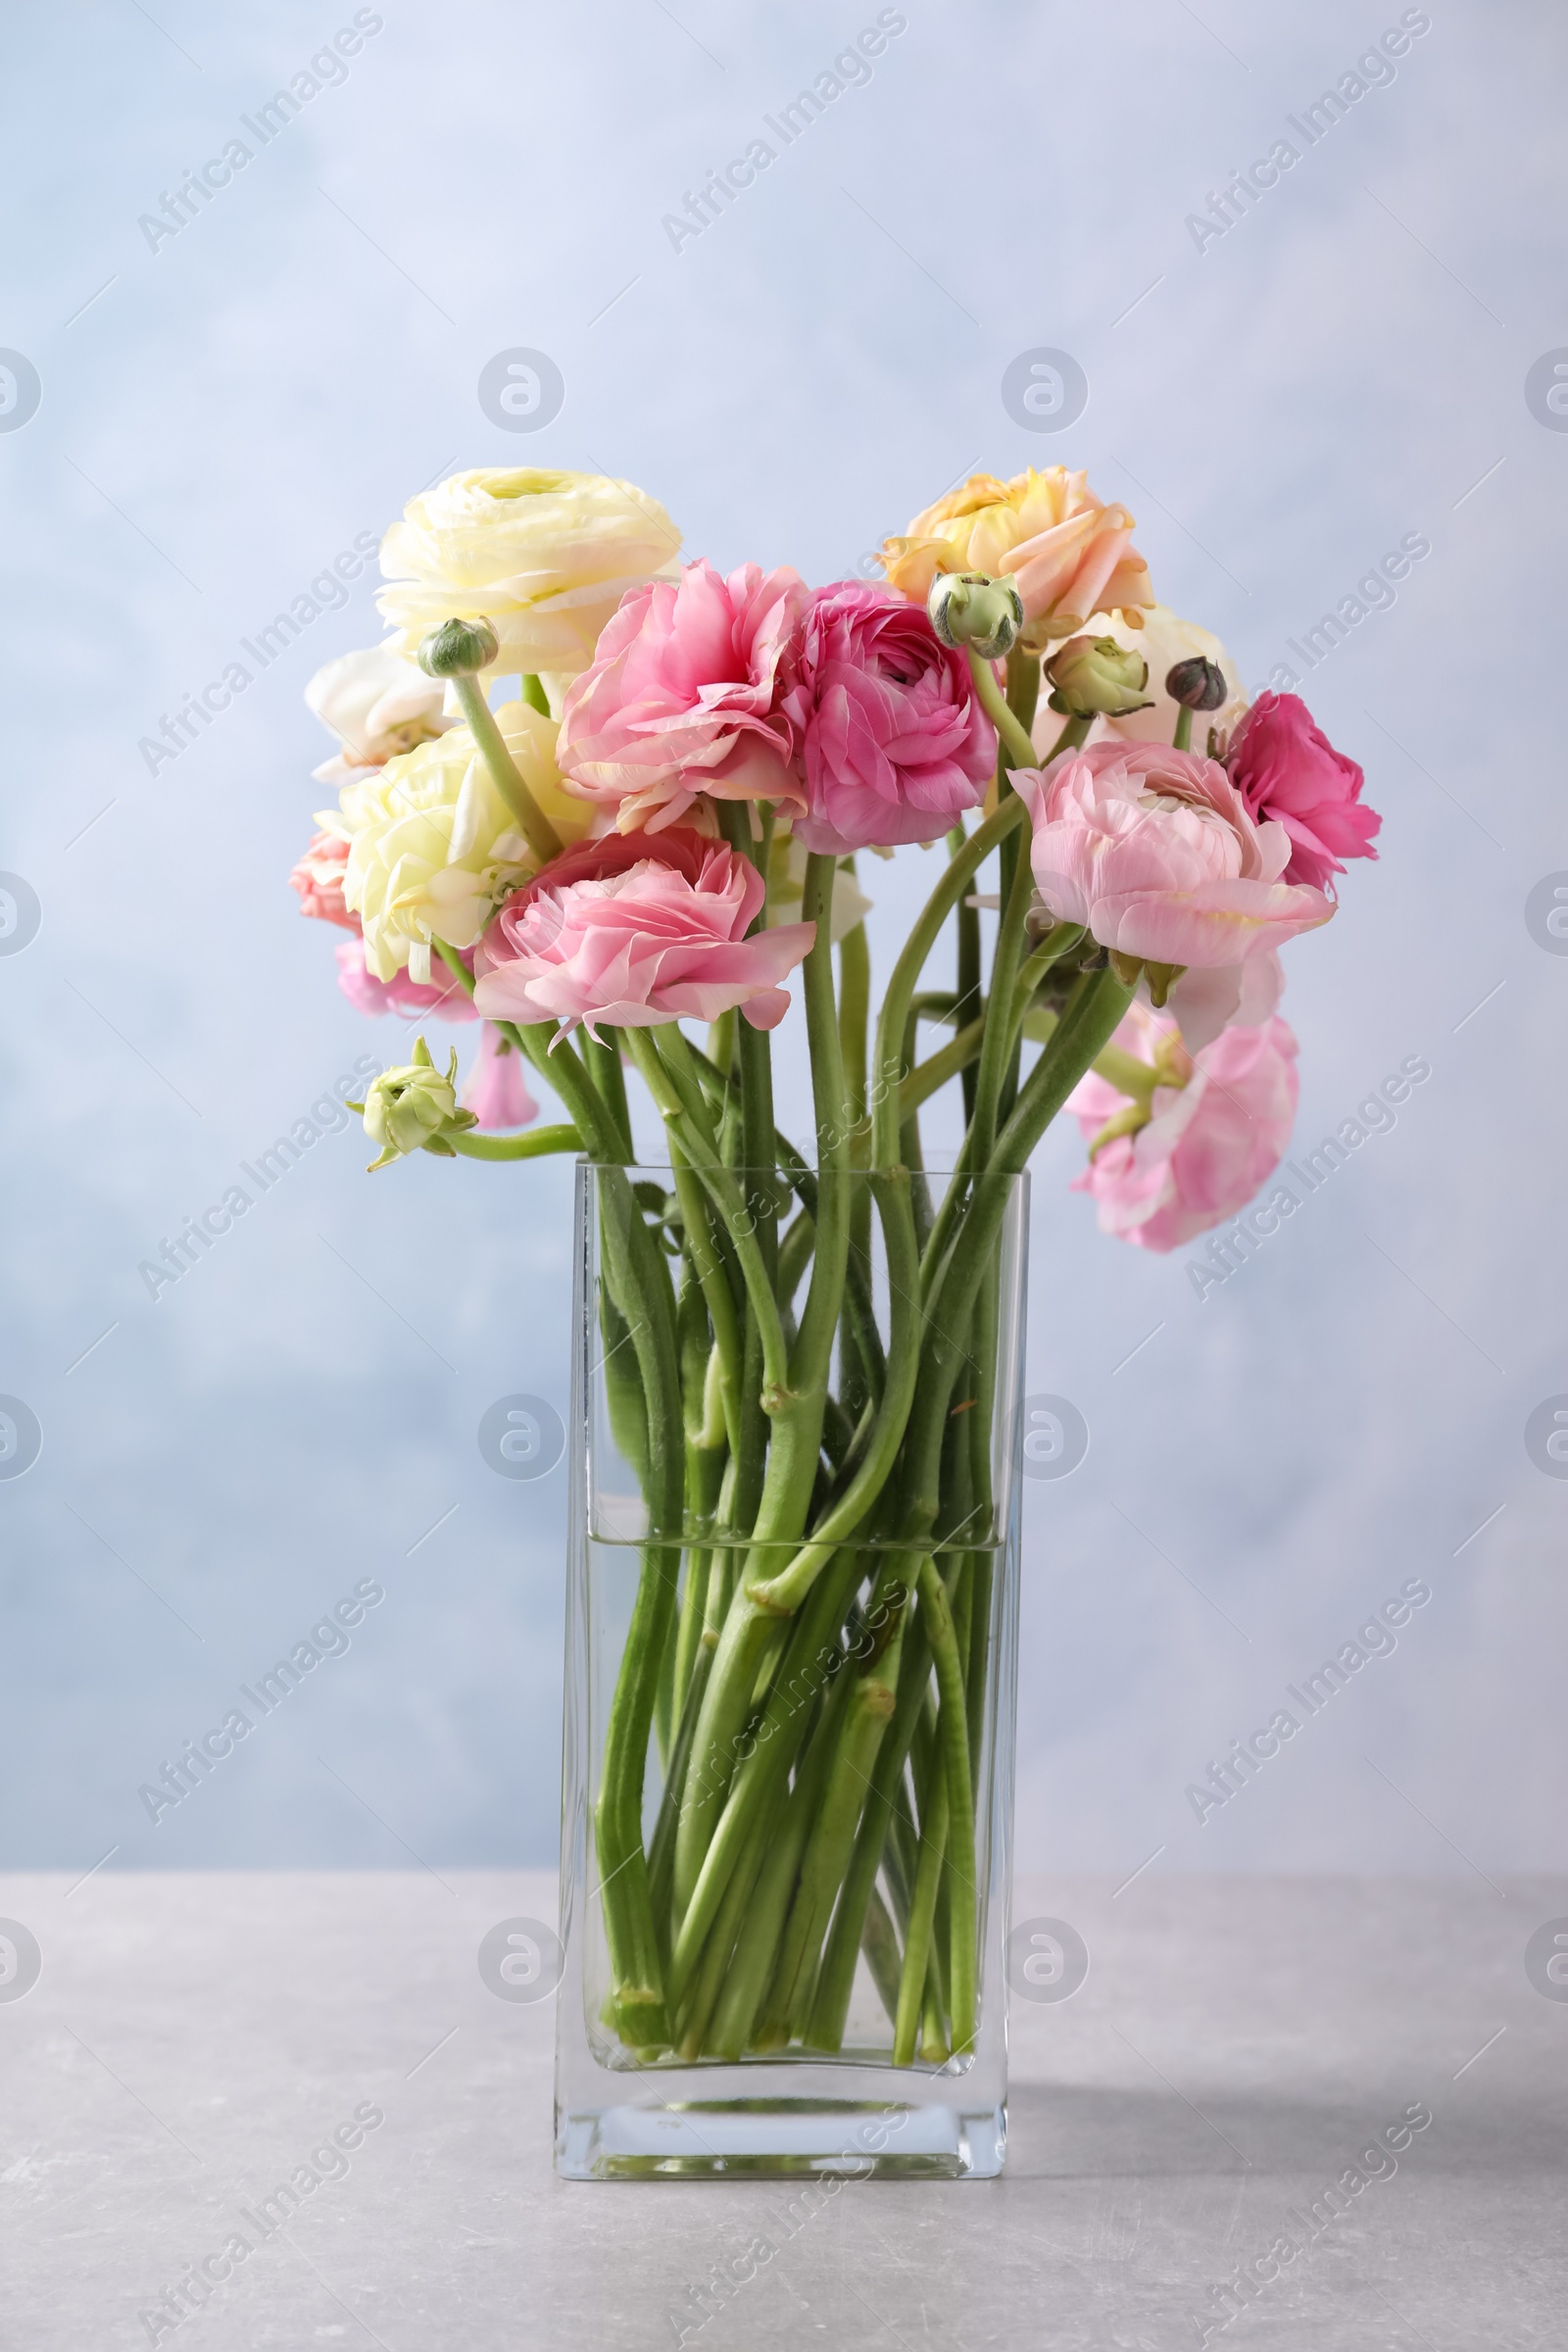 Photo of Beautiful ranunculus flowers in glass vase on table